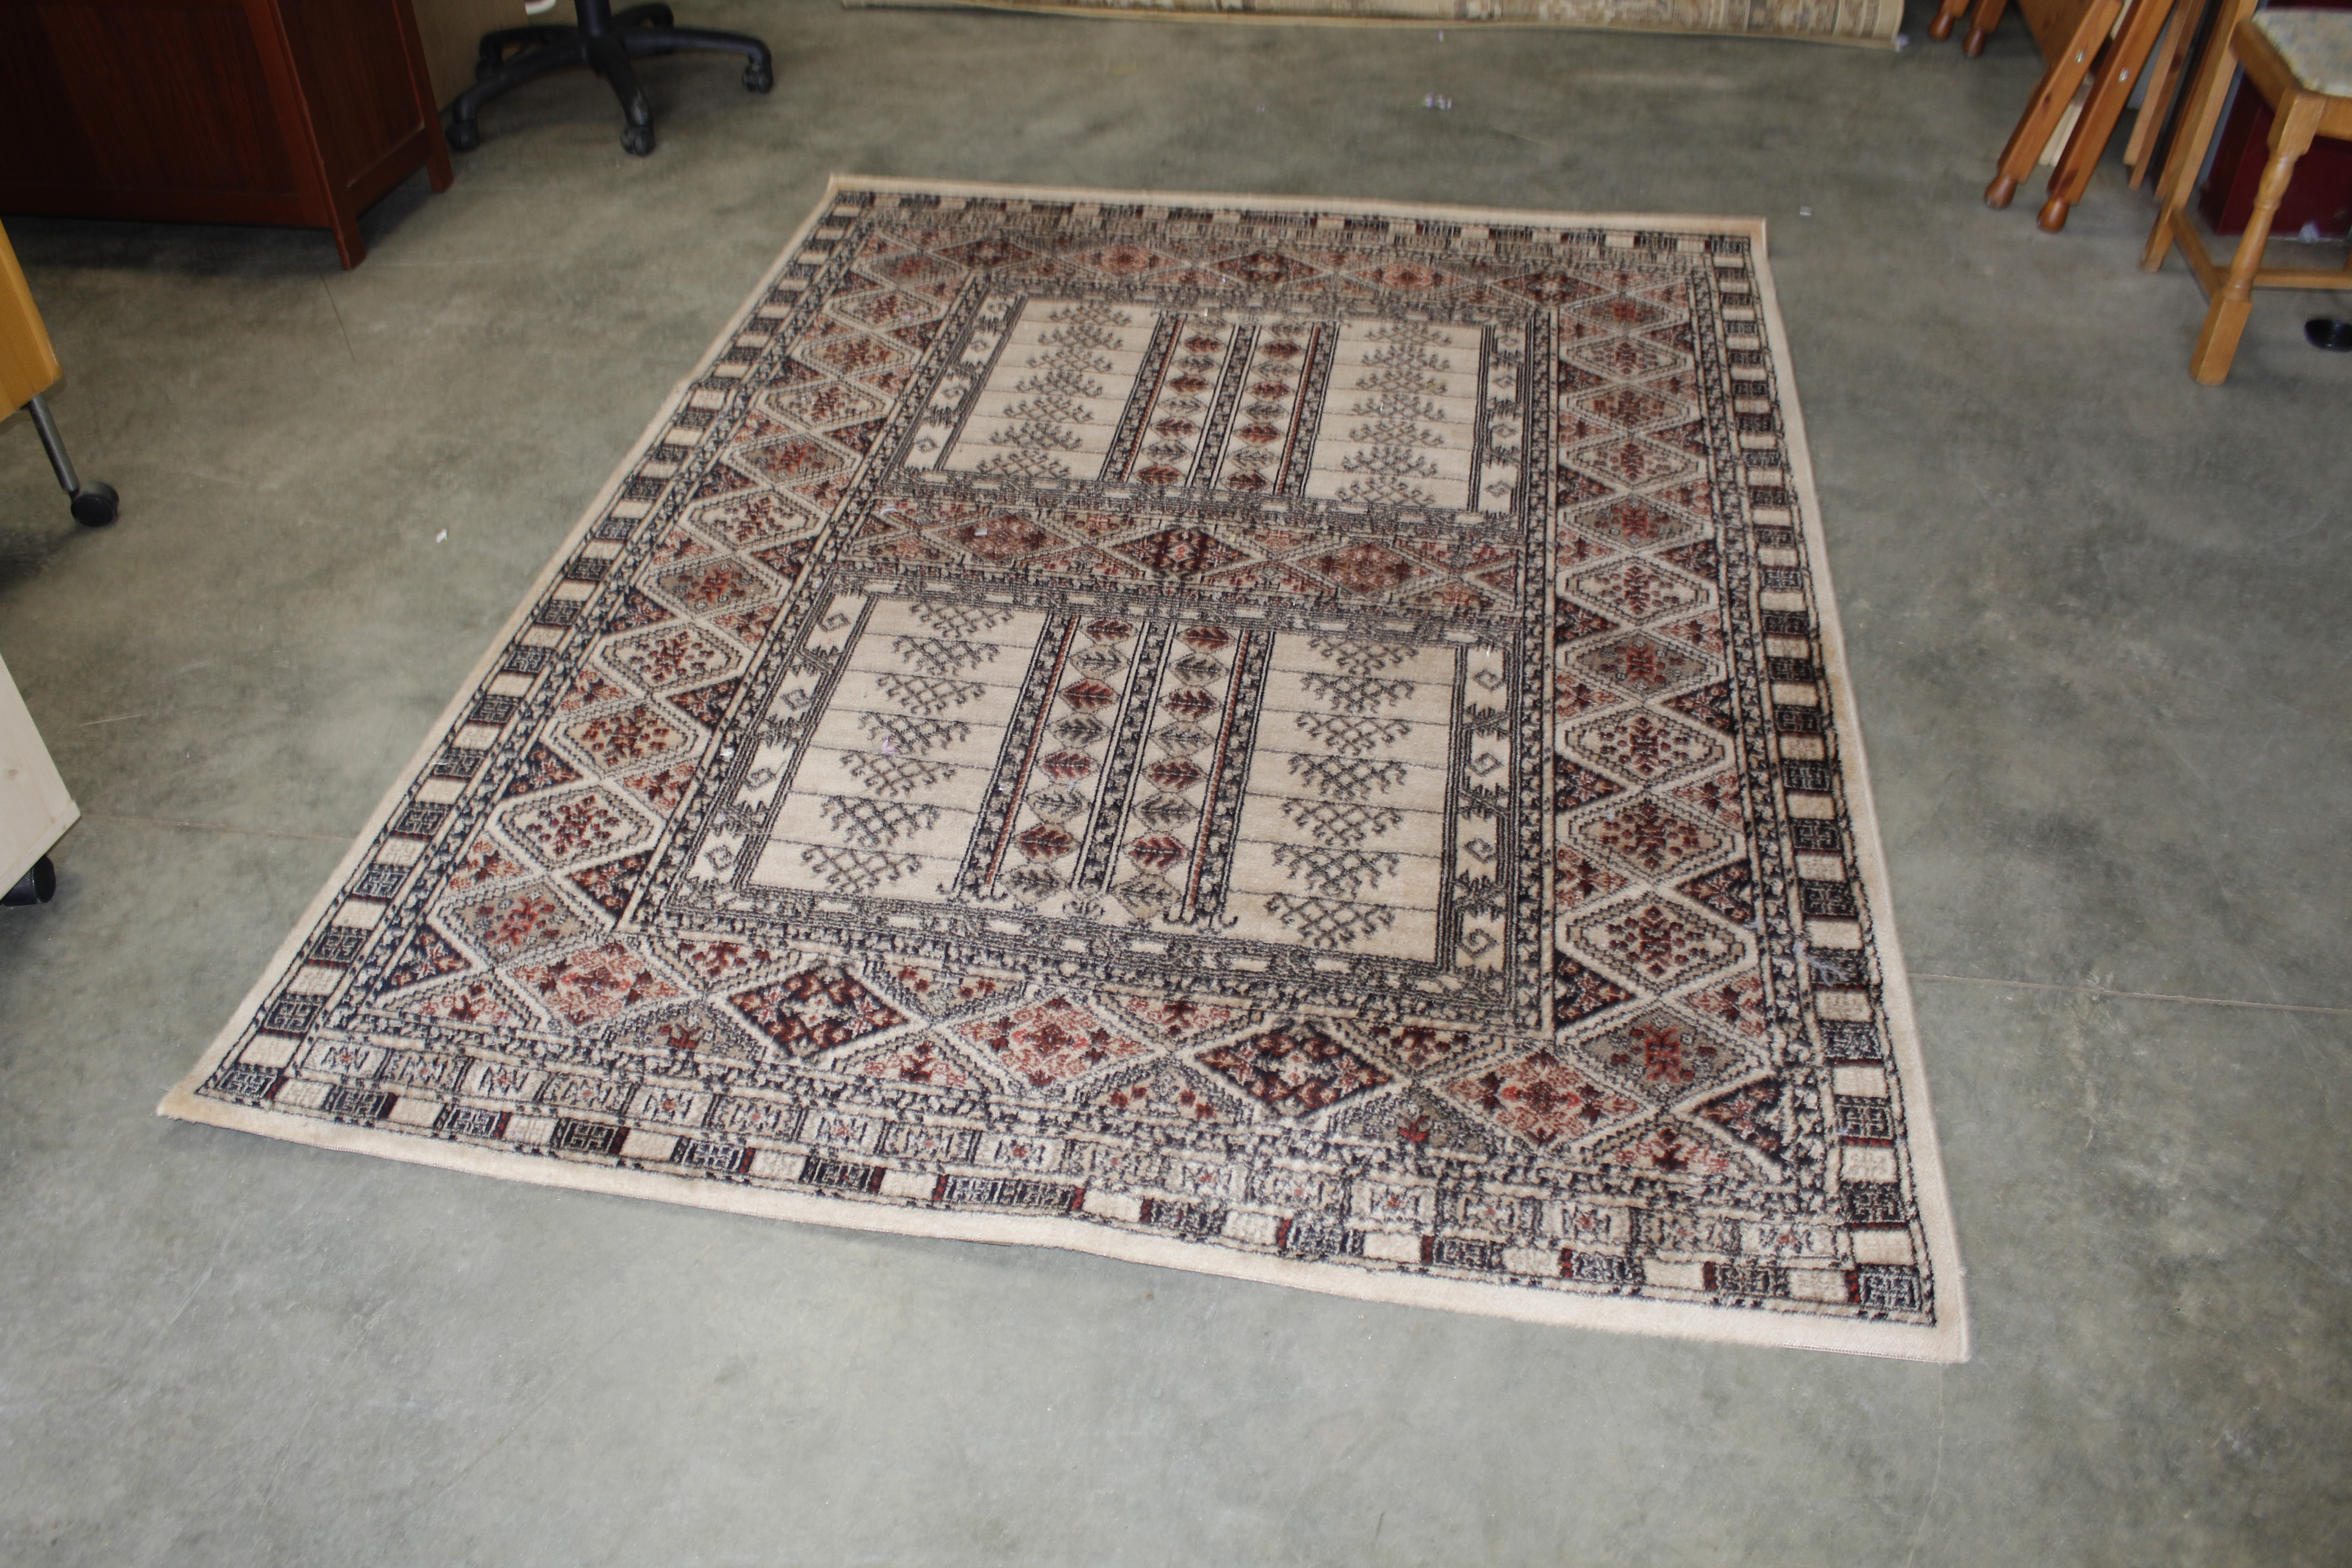 An approx. 7'6" x 5'7" beige patterned rug